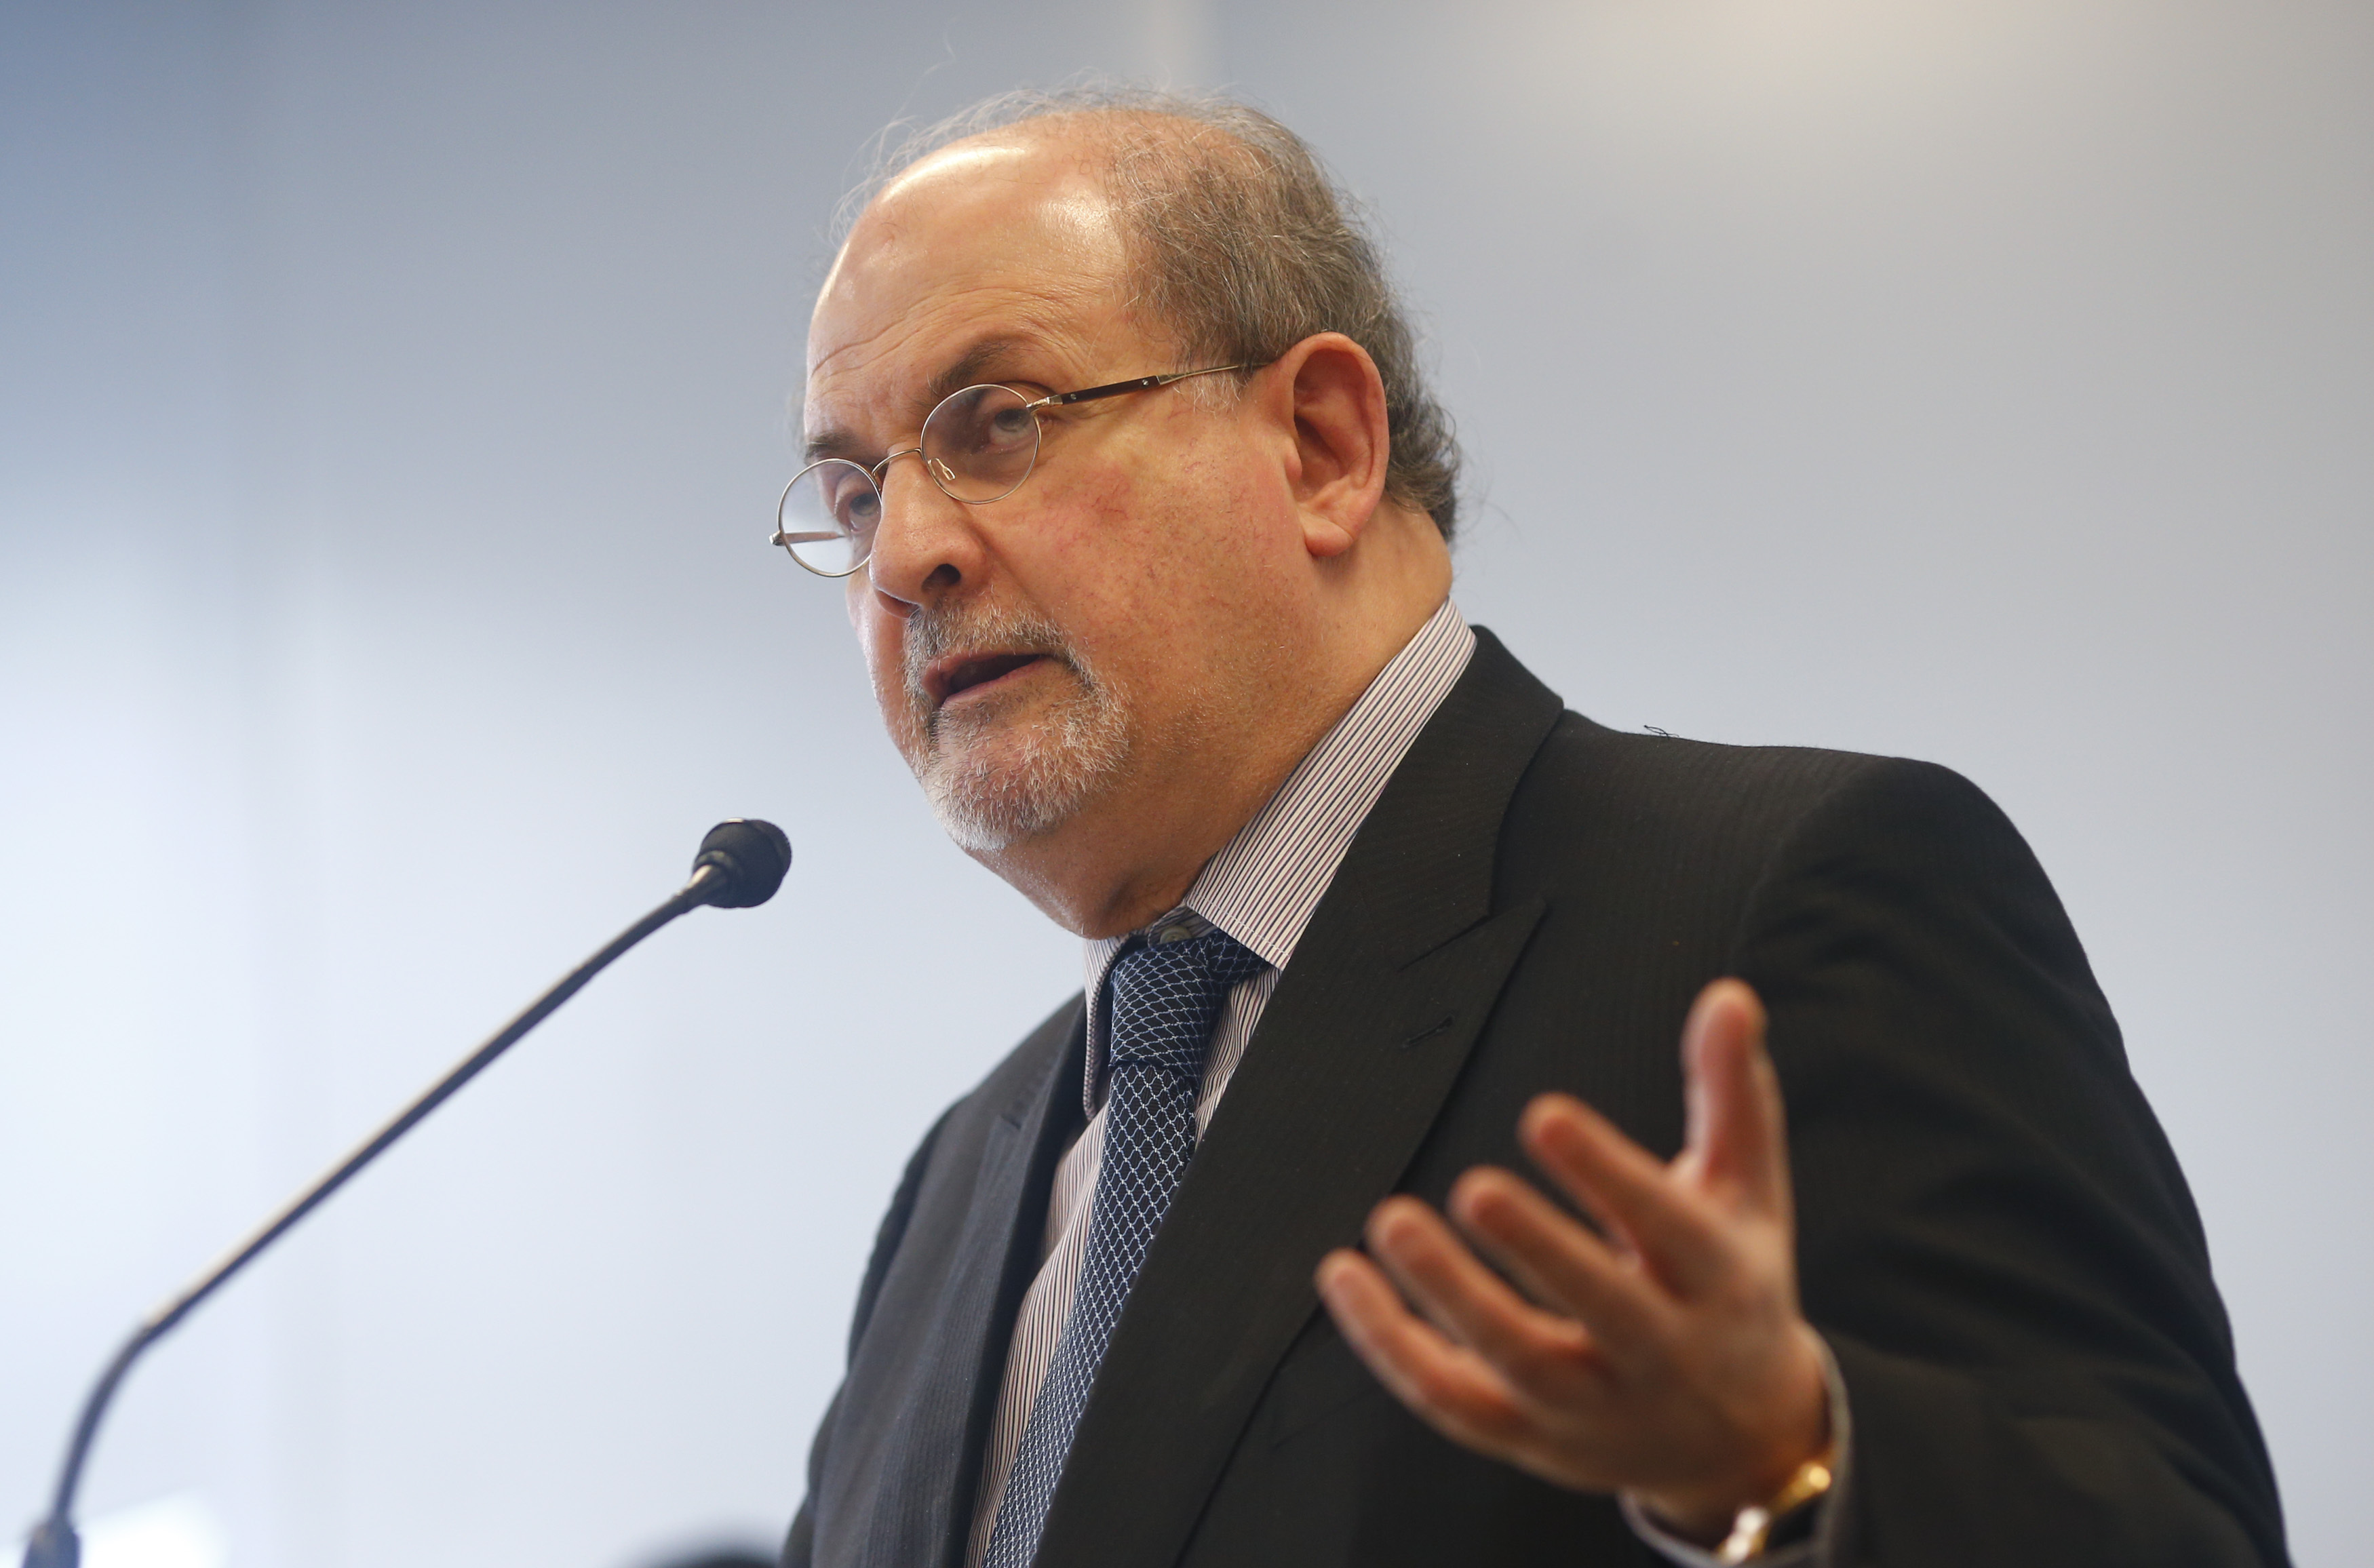 Author Rushdie speaks during the opening news conference of the Frankfurt book fair